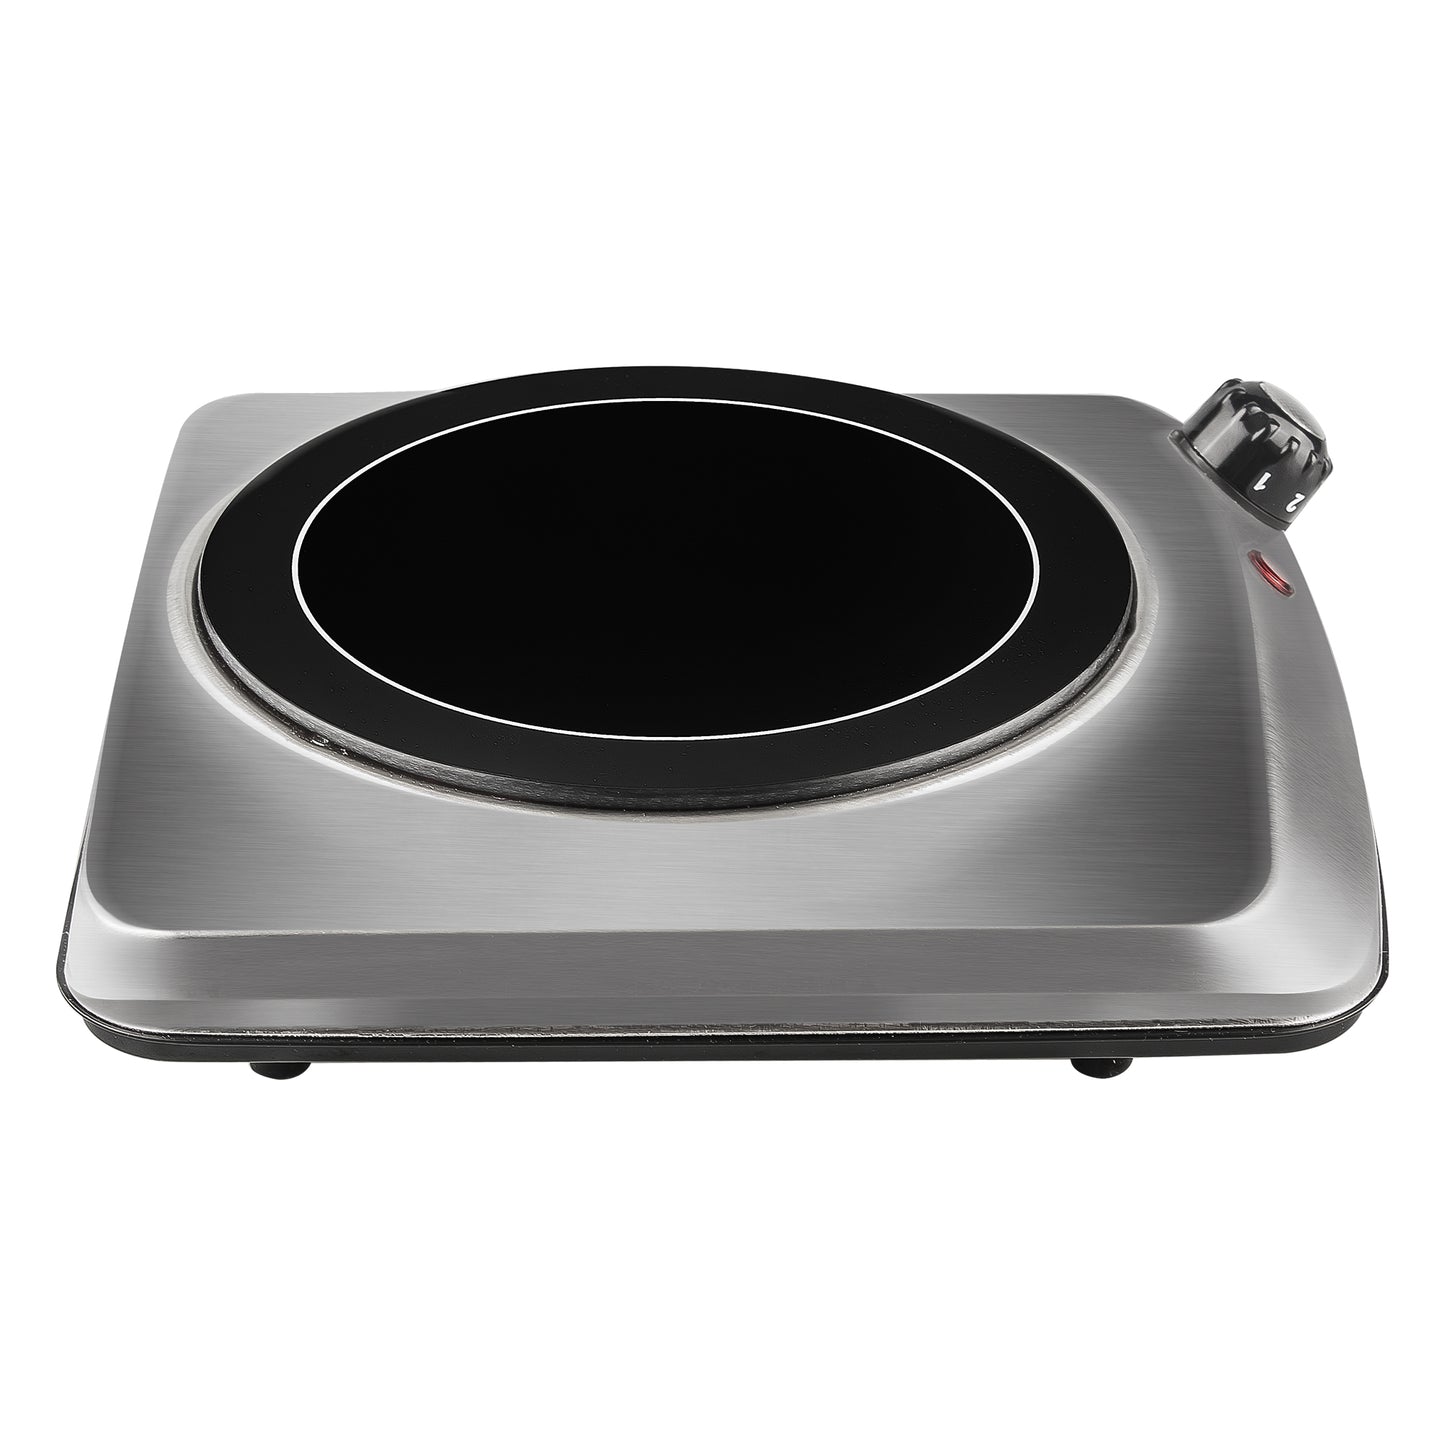 VITRO STAINLESS STEEL ELECTRIC STOVE 1 PLATE 1200W 